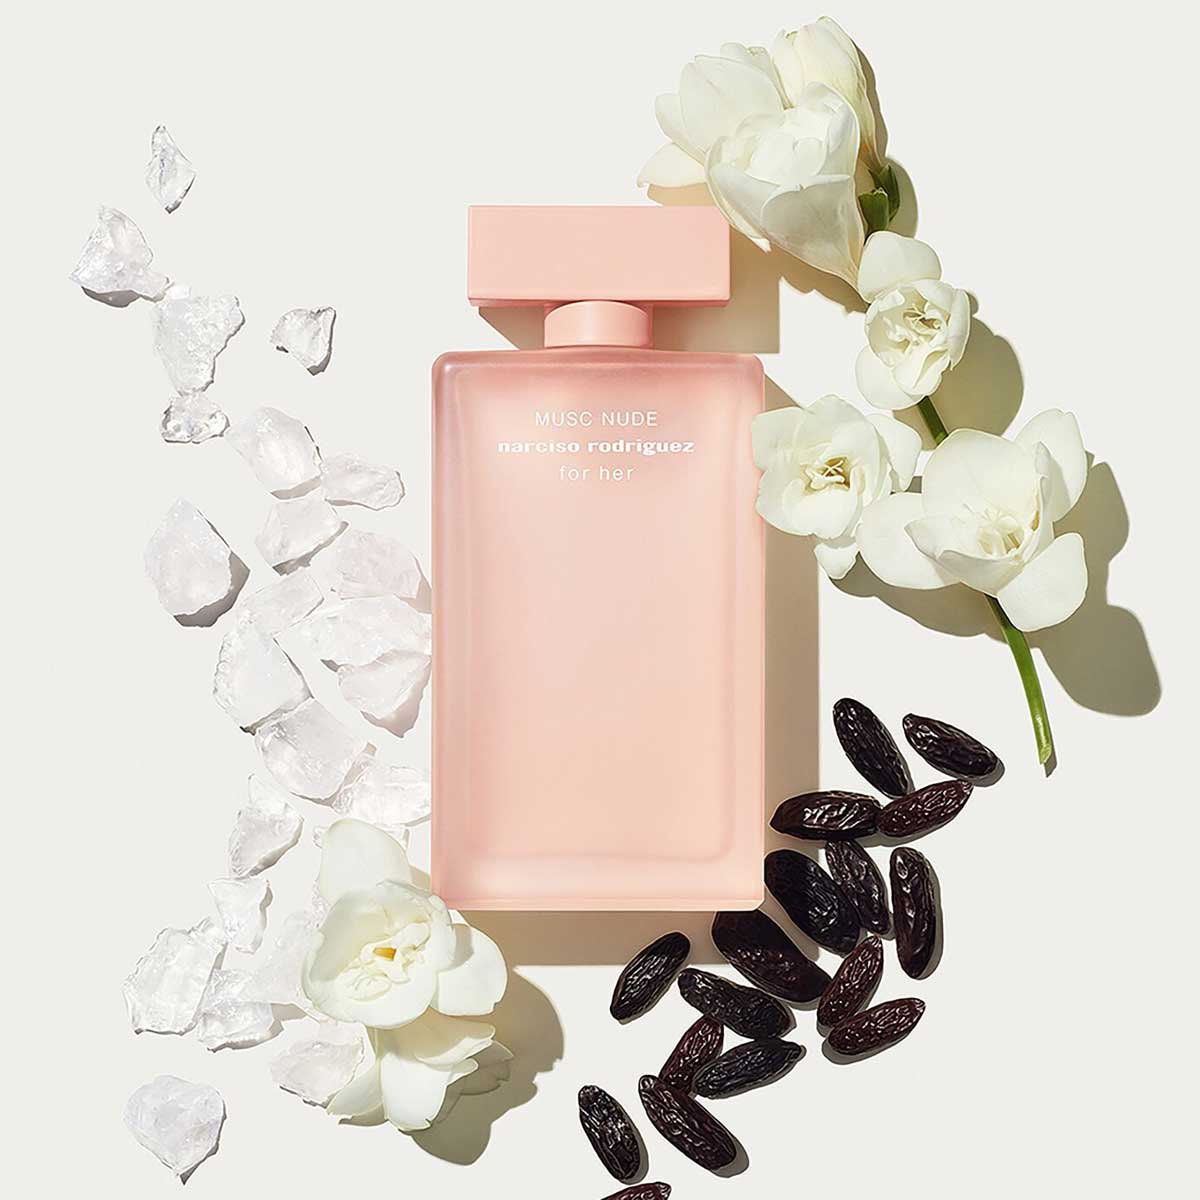 Narciso Rodriguez profumo femminile For Her Musc Nude